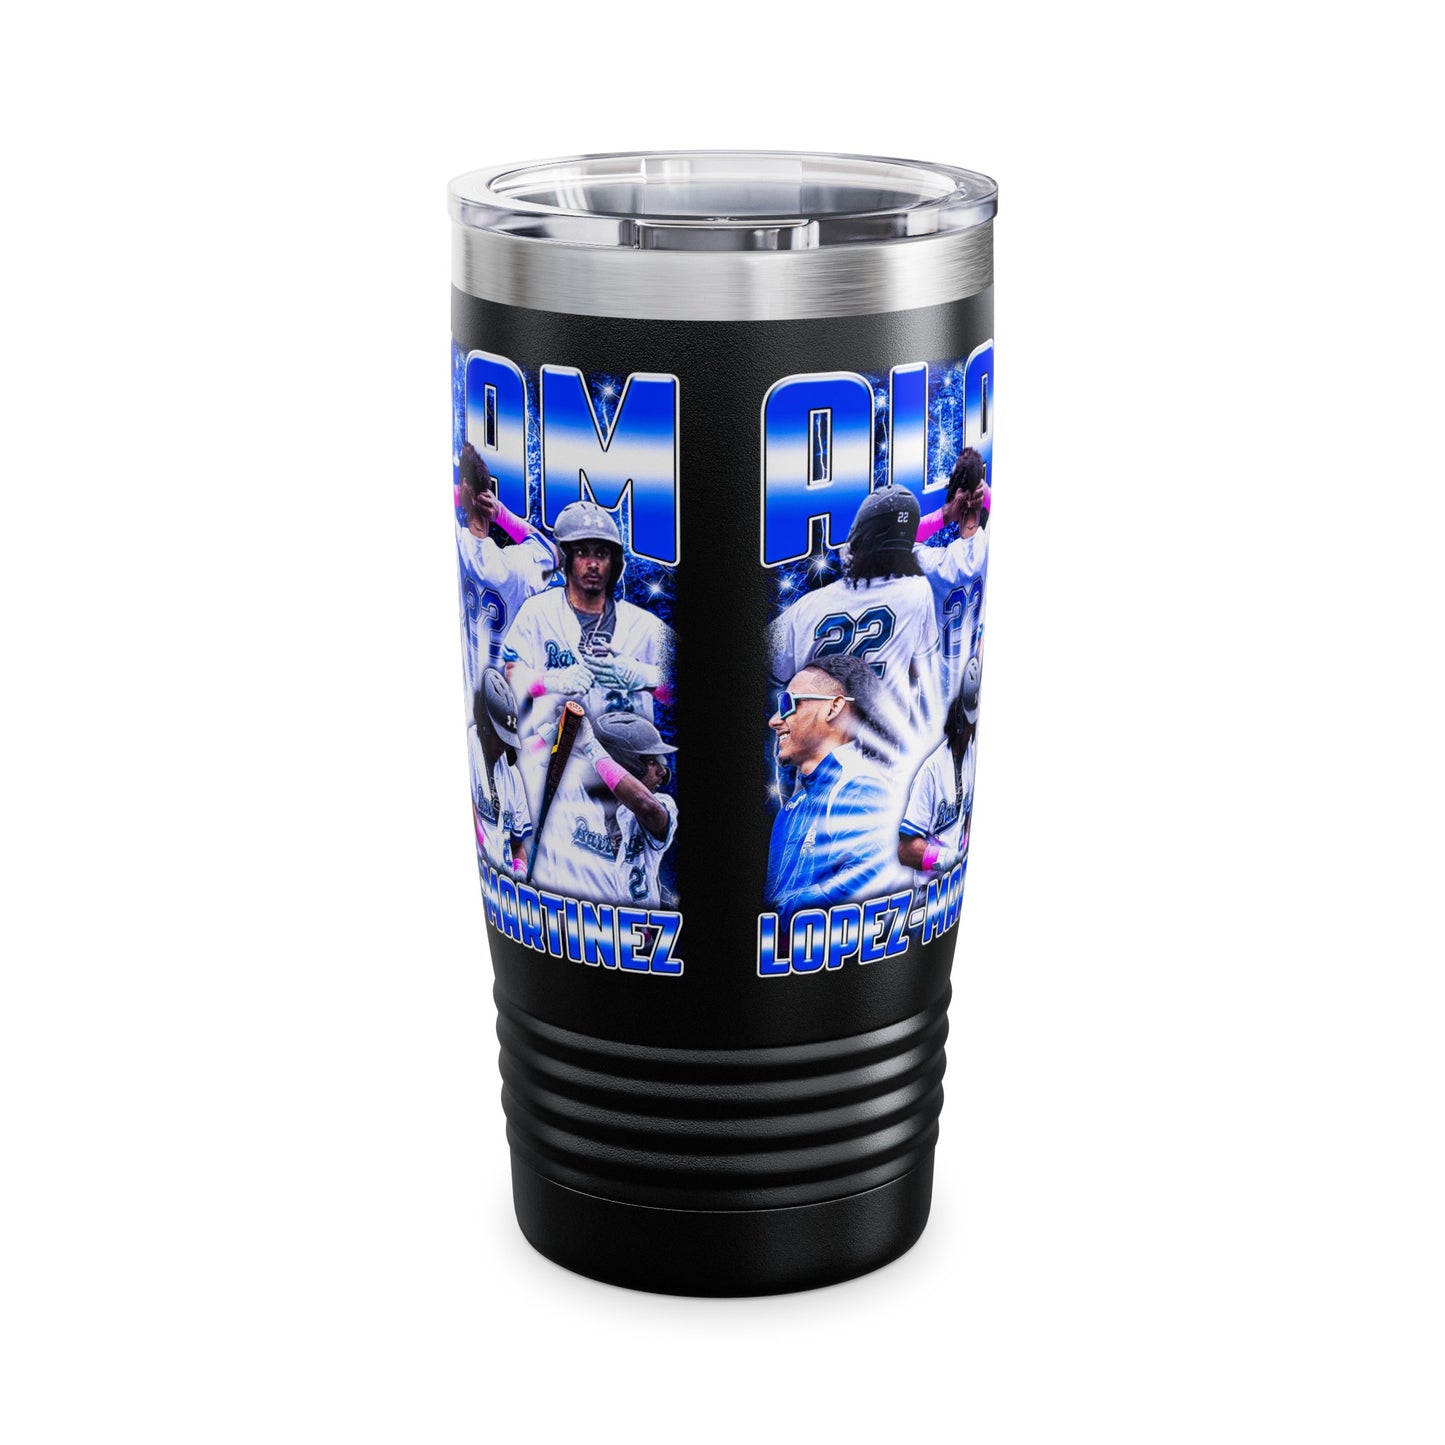 Alam Lopez-Martinez Stainless Steal Tumbler